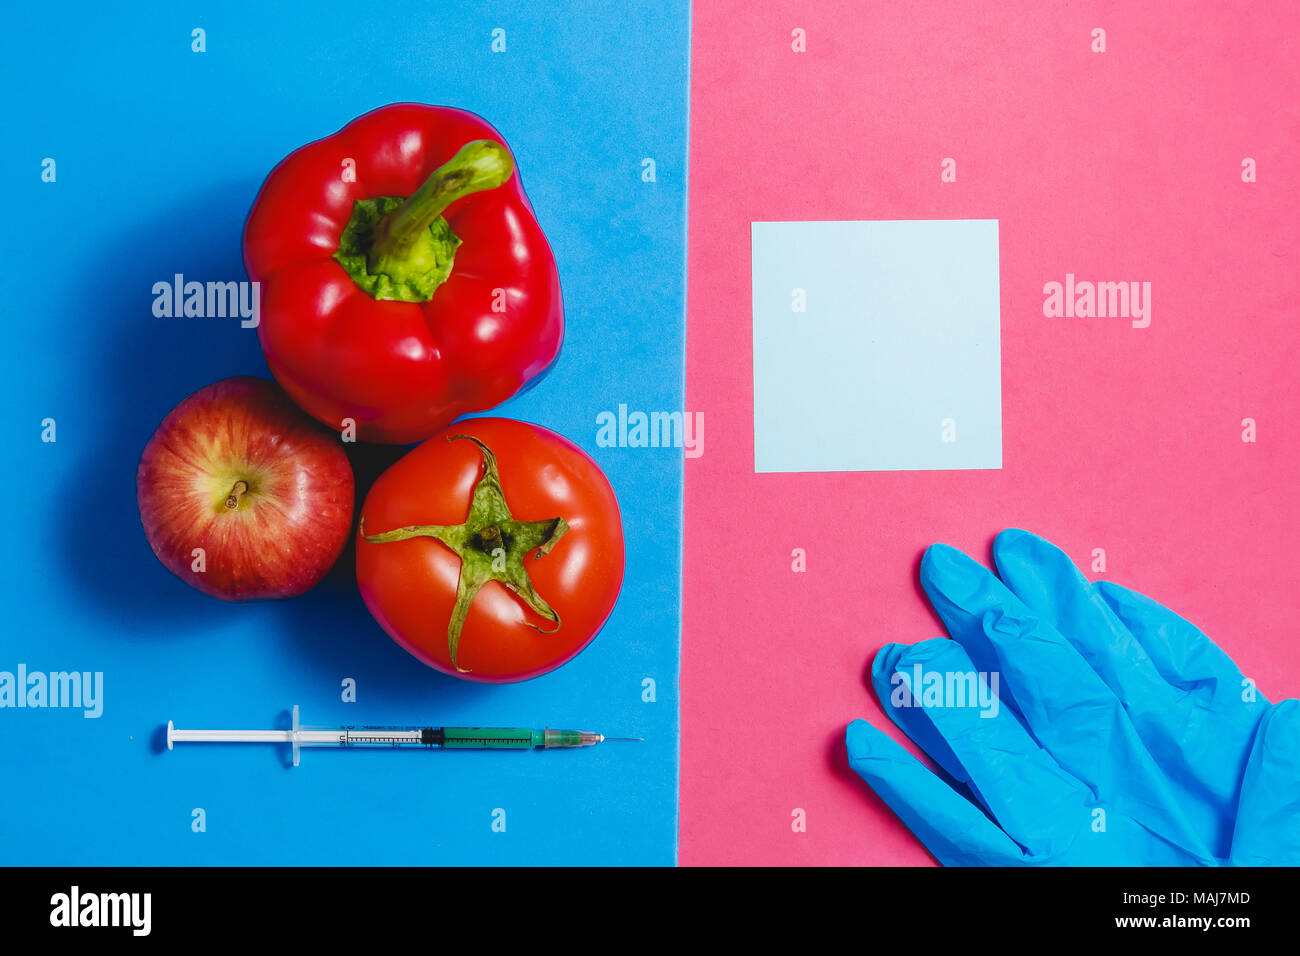 Note, Green Liquid in Syringe, Red Tomato, Apple, Pepper, Blue Gloves. Genetically Modified Food Concept on Pink Blue. Stock Photo